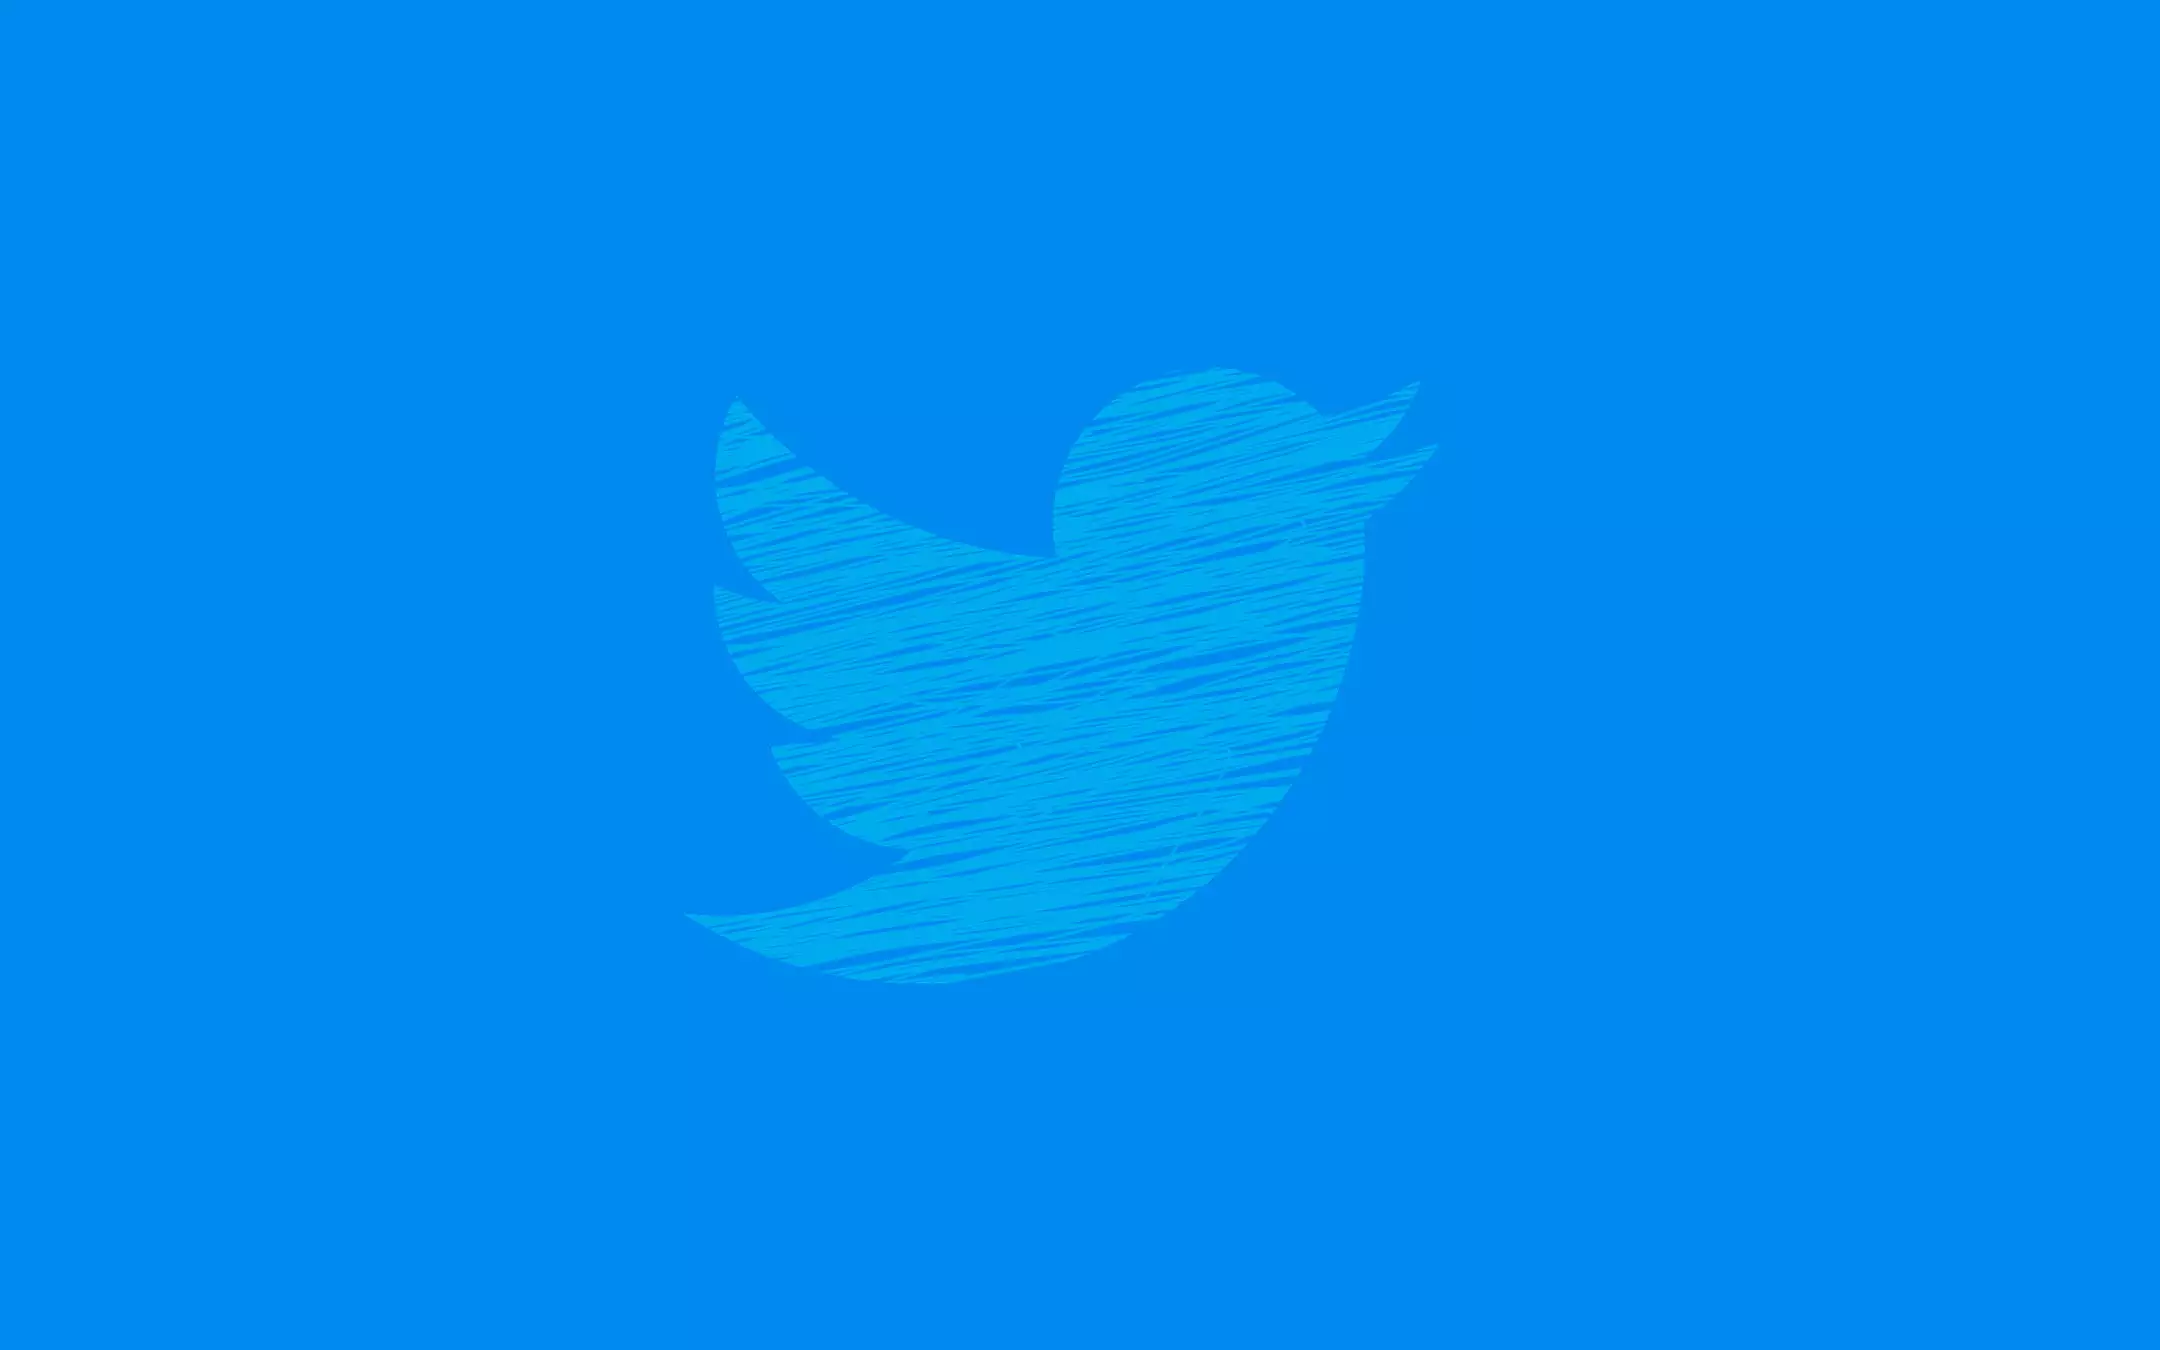 Twitter will block accounts with Safety Mode